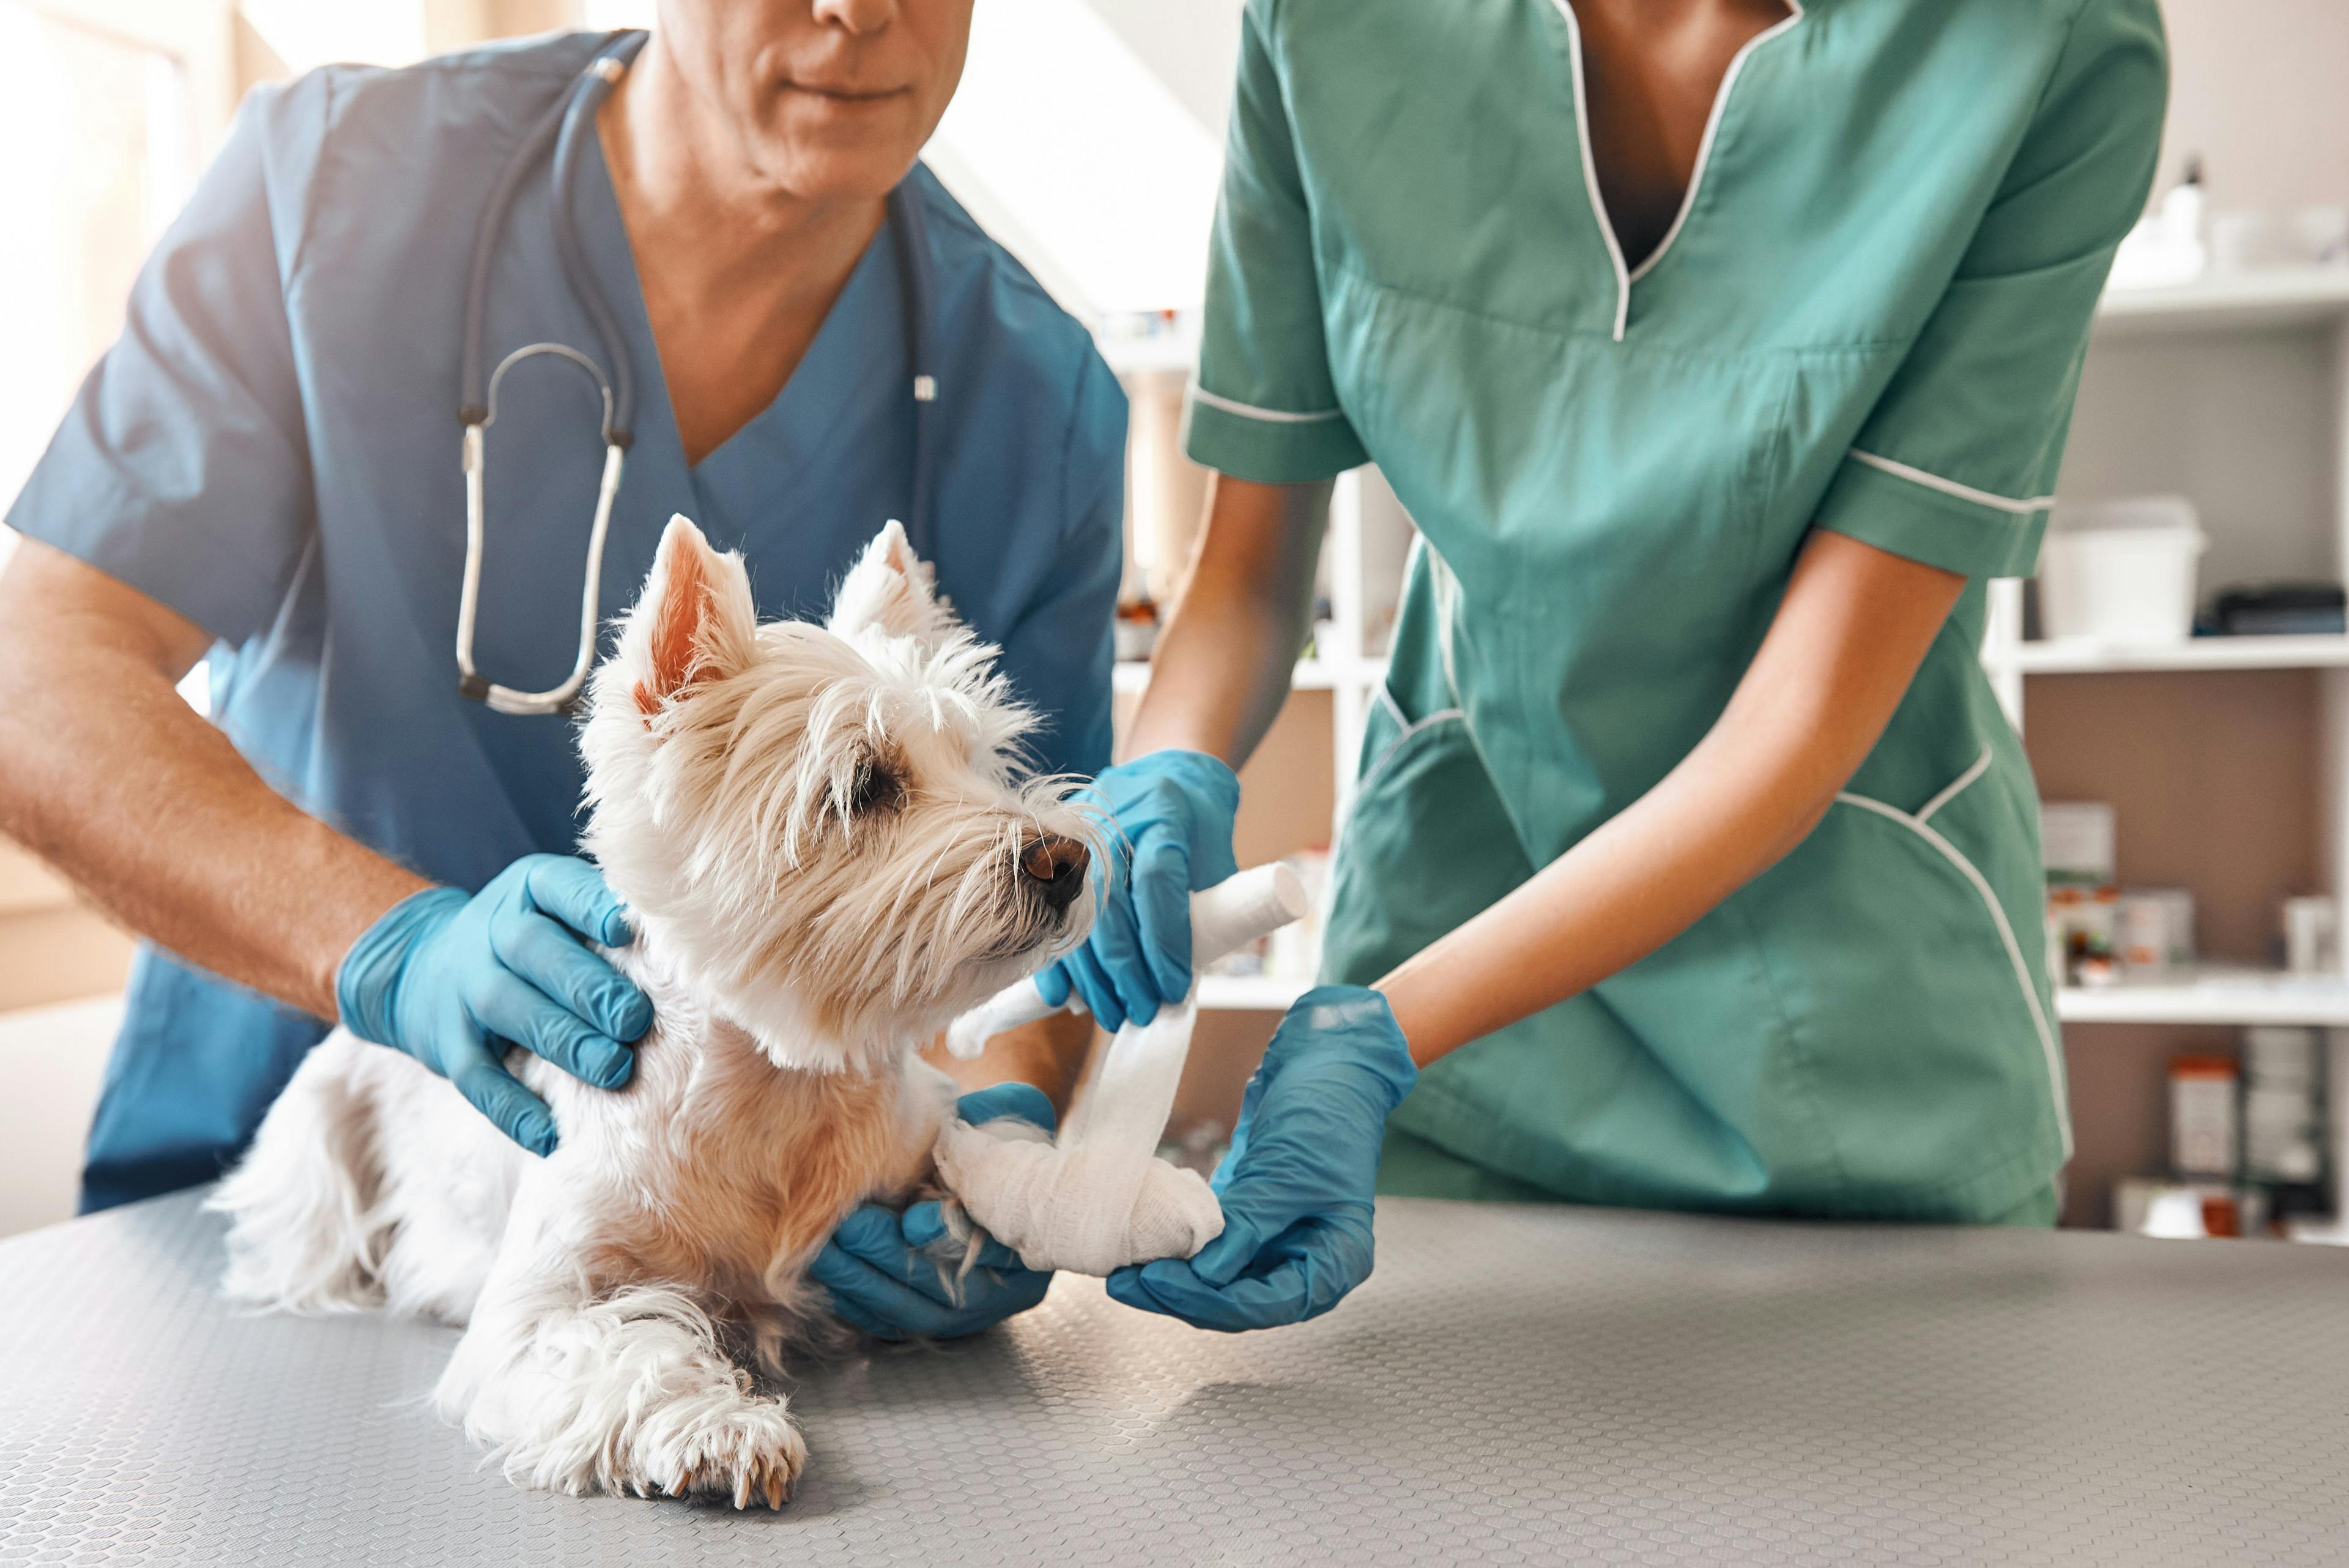 3 Must-reads on veterinary emergency and critical care